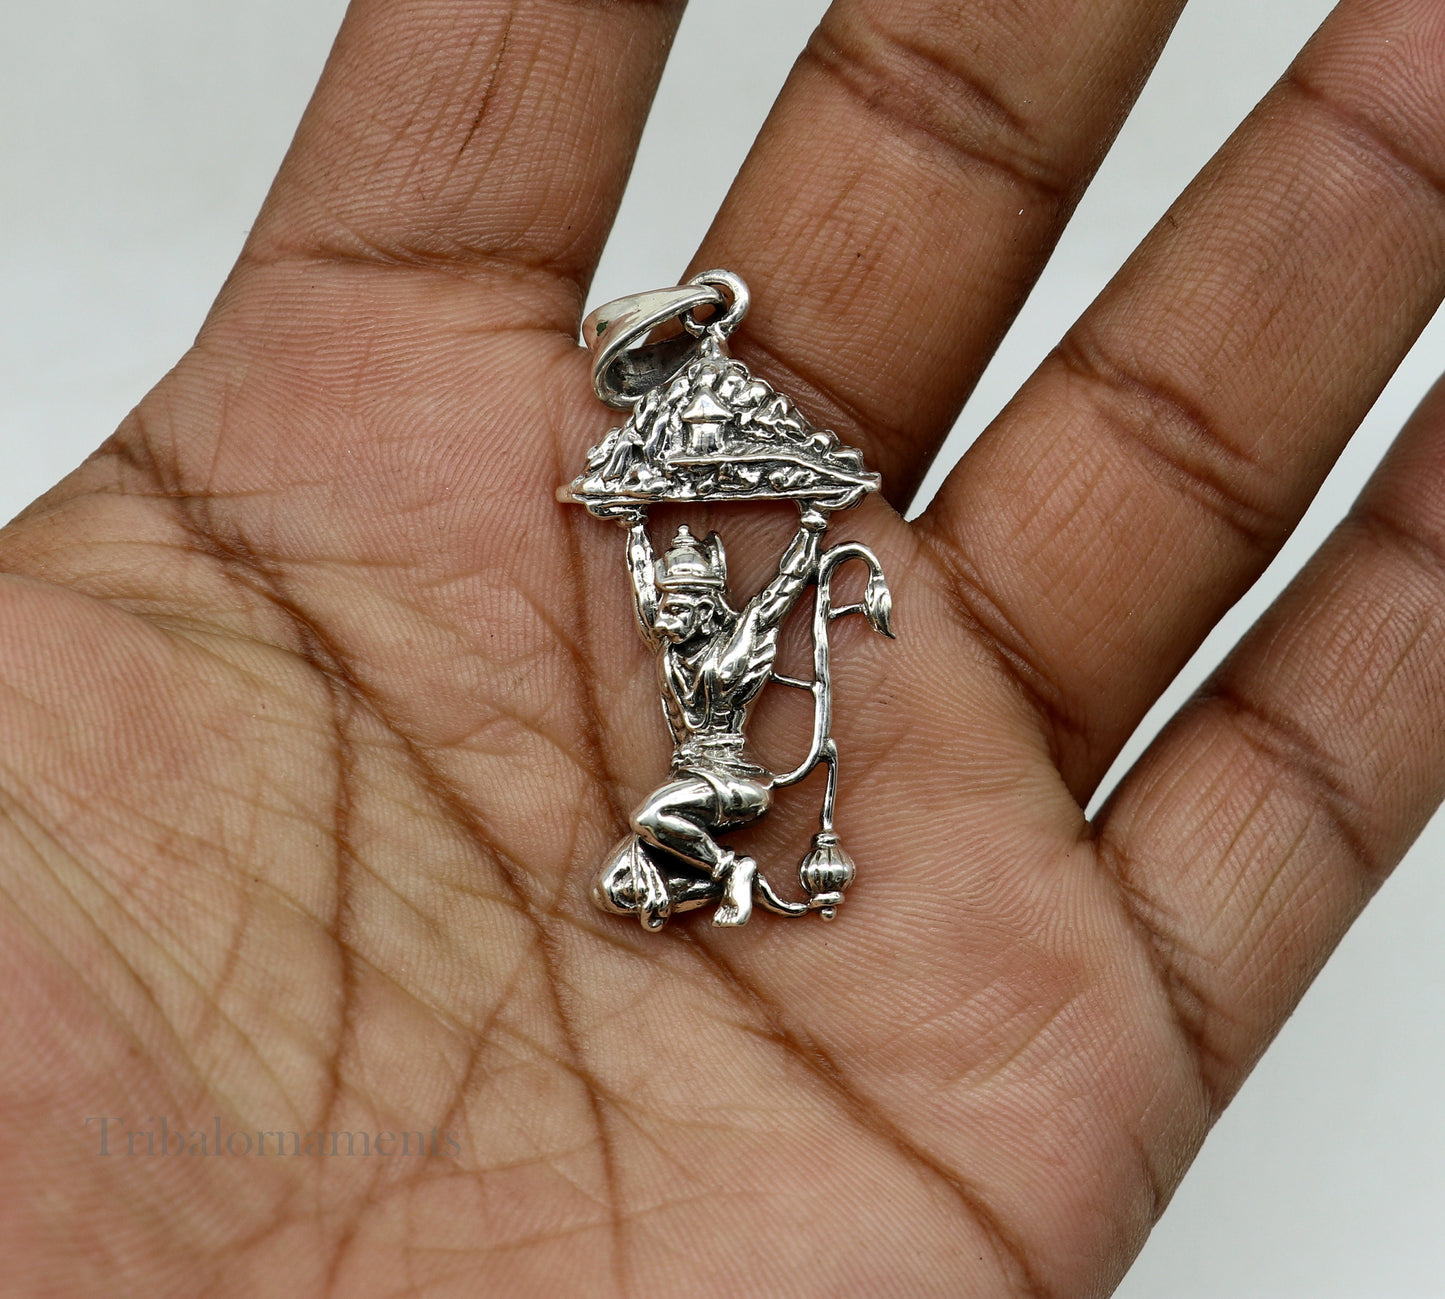 Lord hanuman with mount pendant 92.5 sterling silver handmade divine blessing pendant, amazing craftsmanship pendant gifting jewelry ssp906 - TRIBAL ORNAMENTS